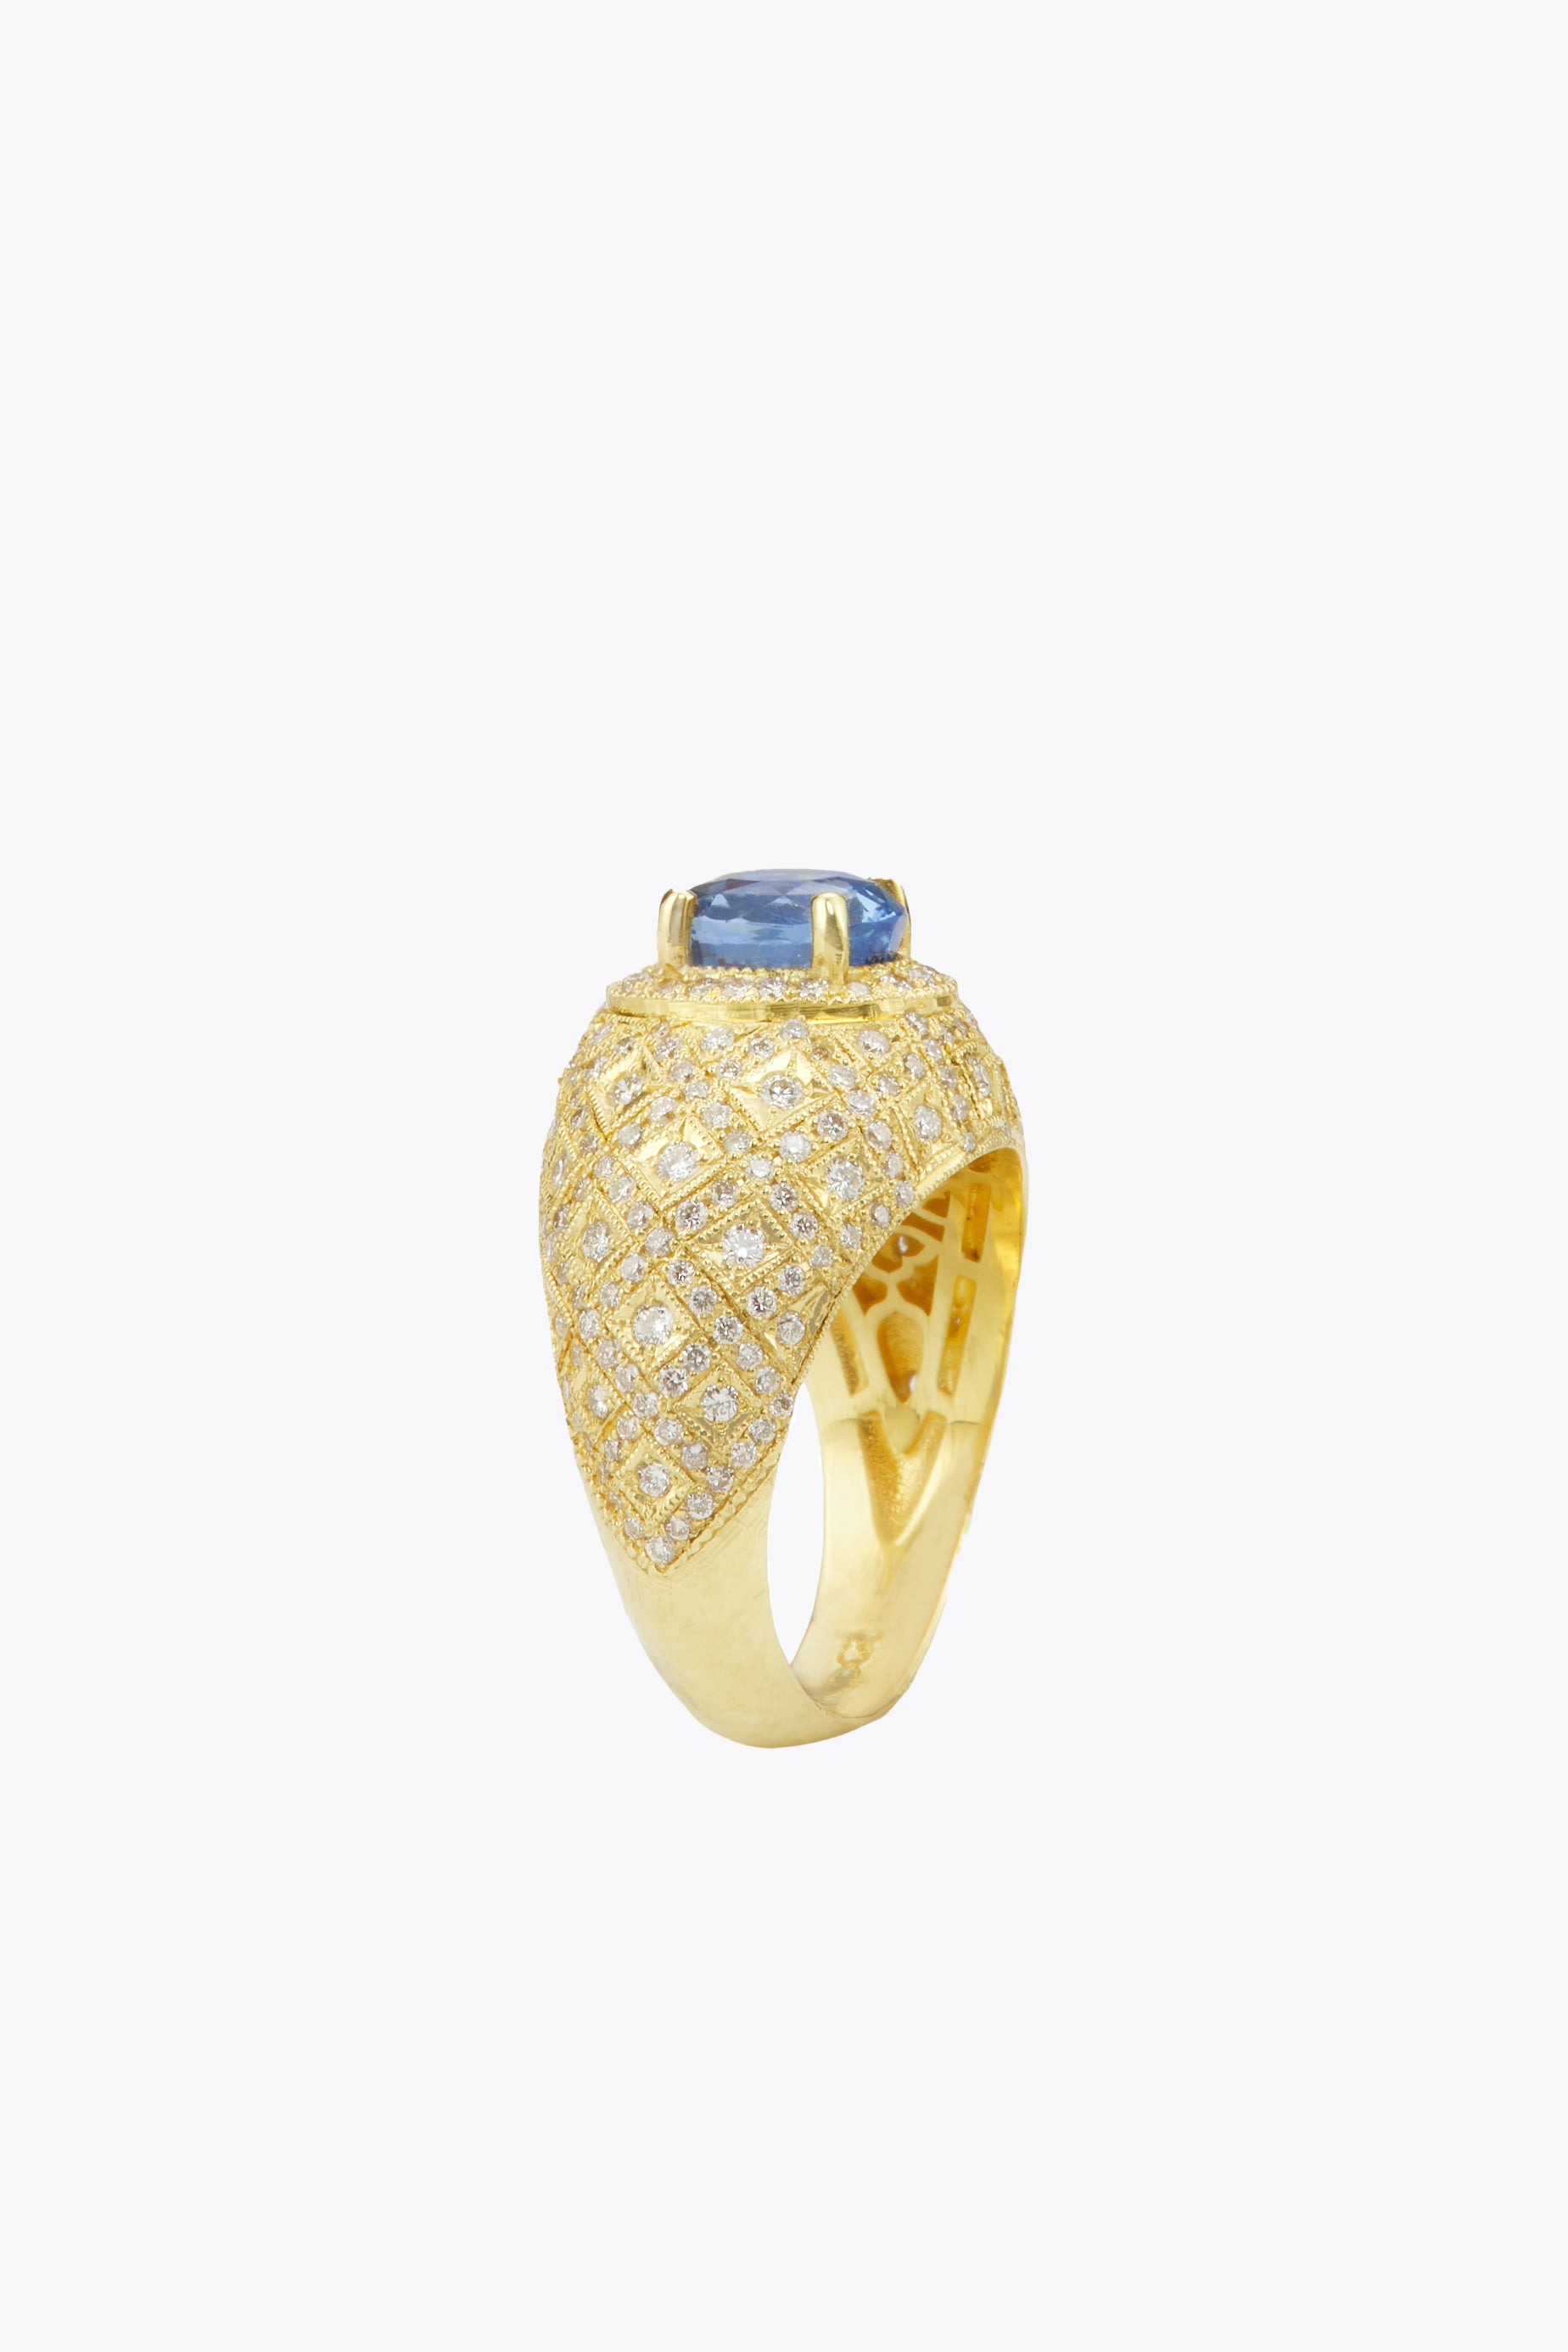 Blue Sapphire and Diamond Pave Ring